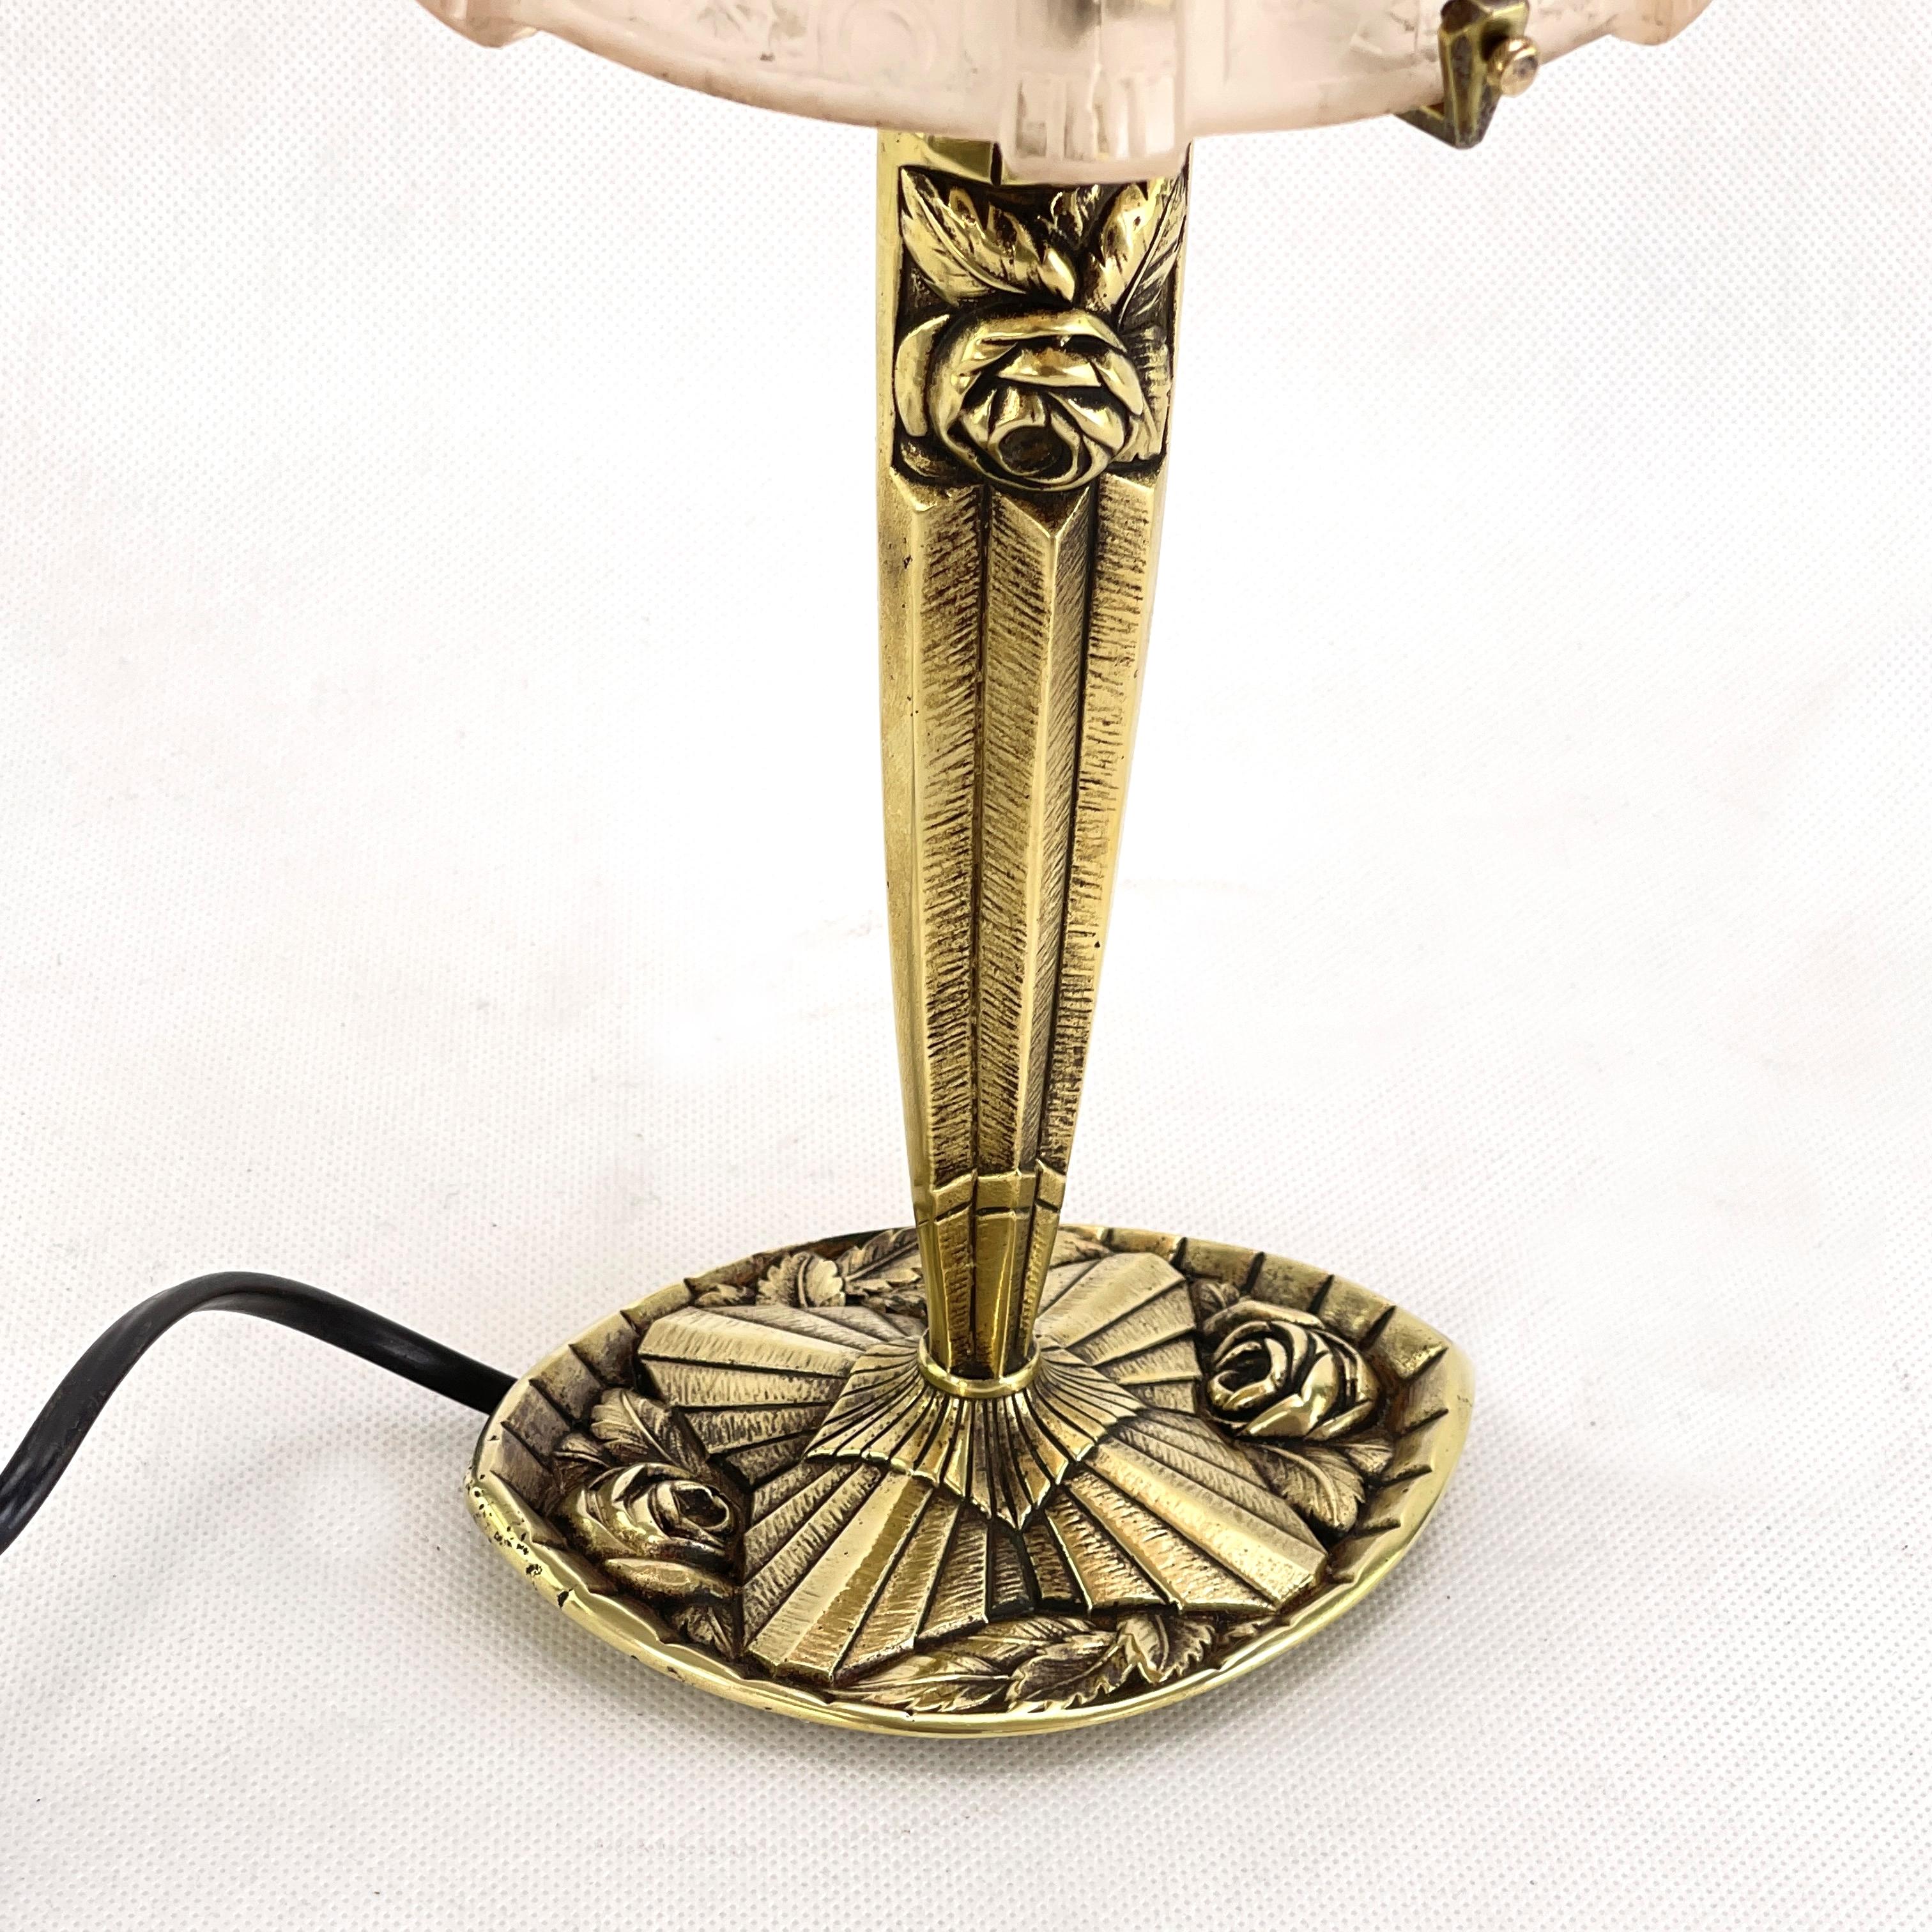 This original Art Deco table lamp impresses with its simple and functional Art Deco design. The lamp is signed and gives a very pleasant light. This table lamp is an absolute design classic from the ART DECO period.

